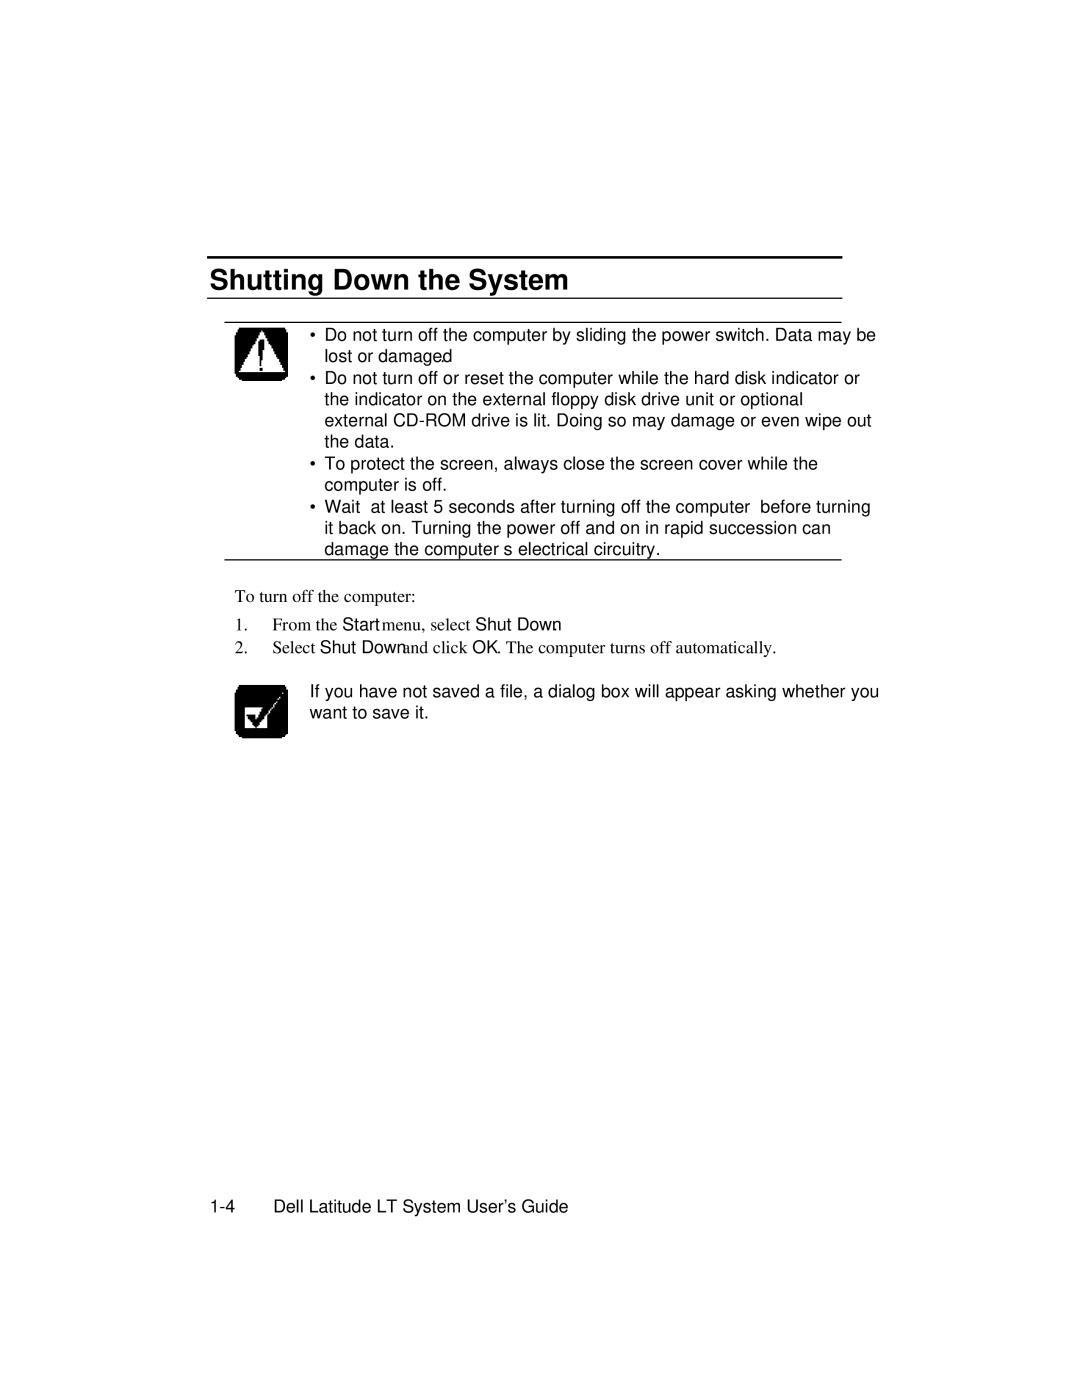 Dell LT System manual Shutting Down the System 